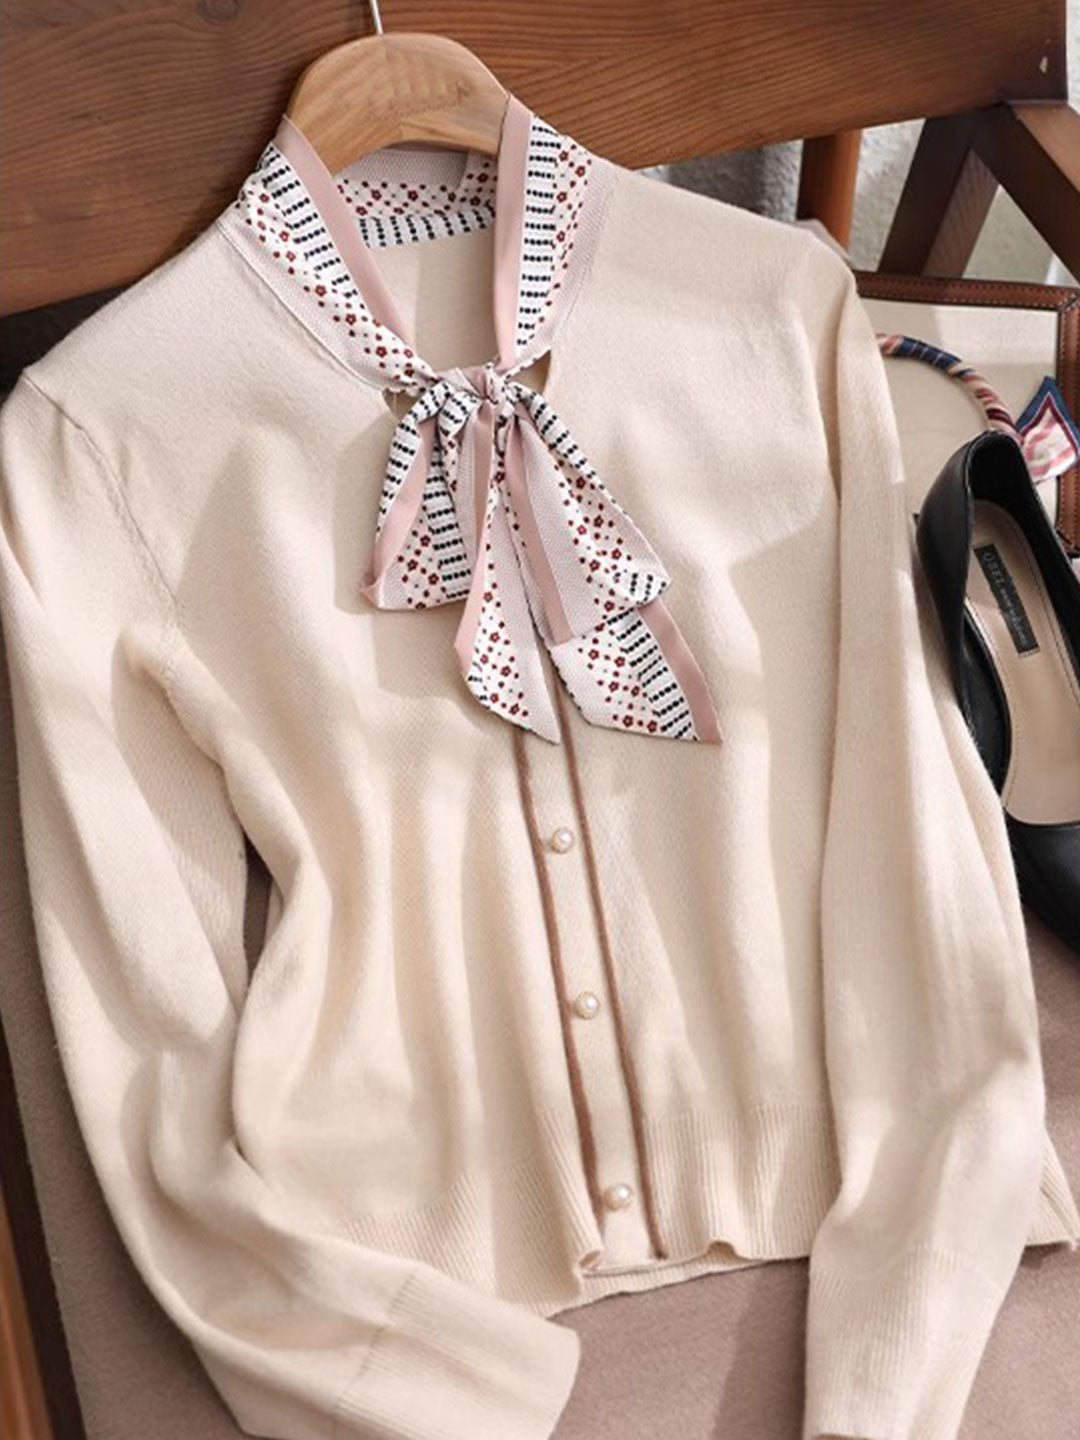 Alyssa Retro Scarf Collar Bow Tie Knitted Sweater-Apricot